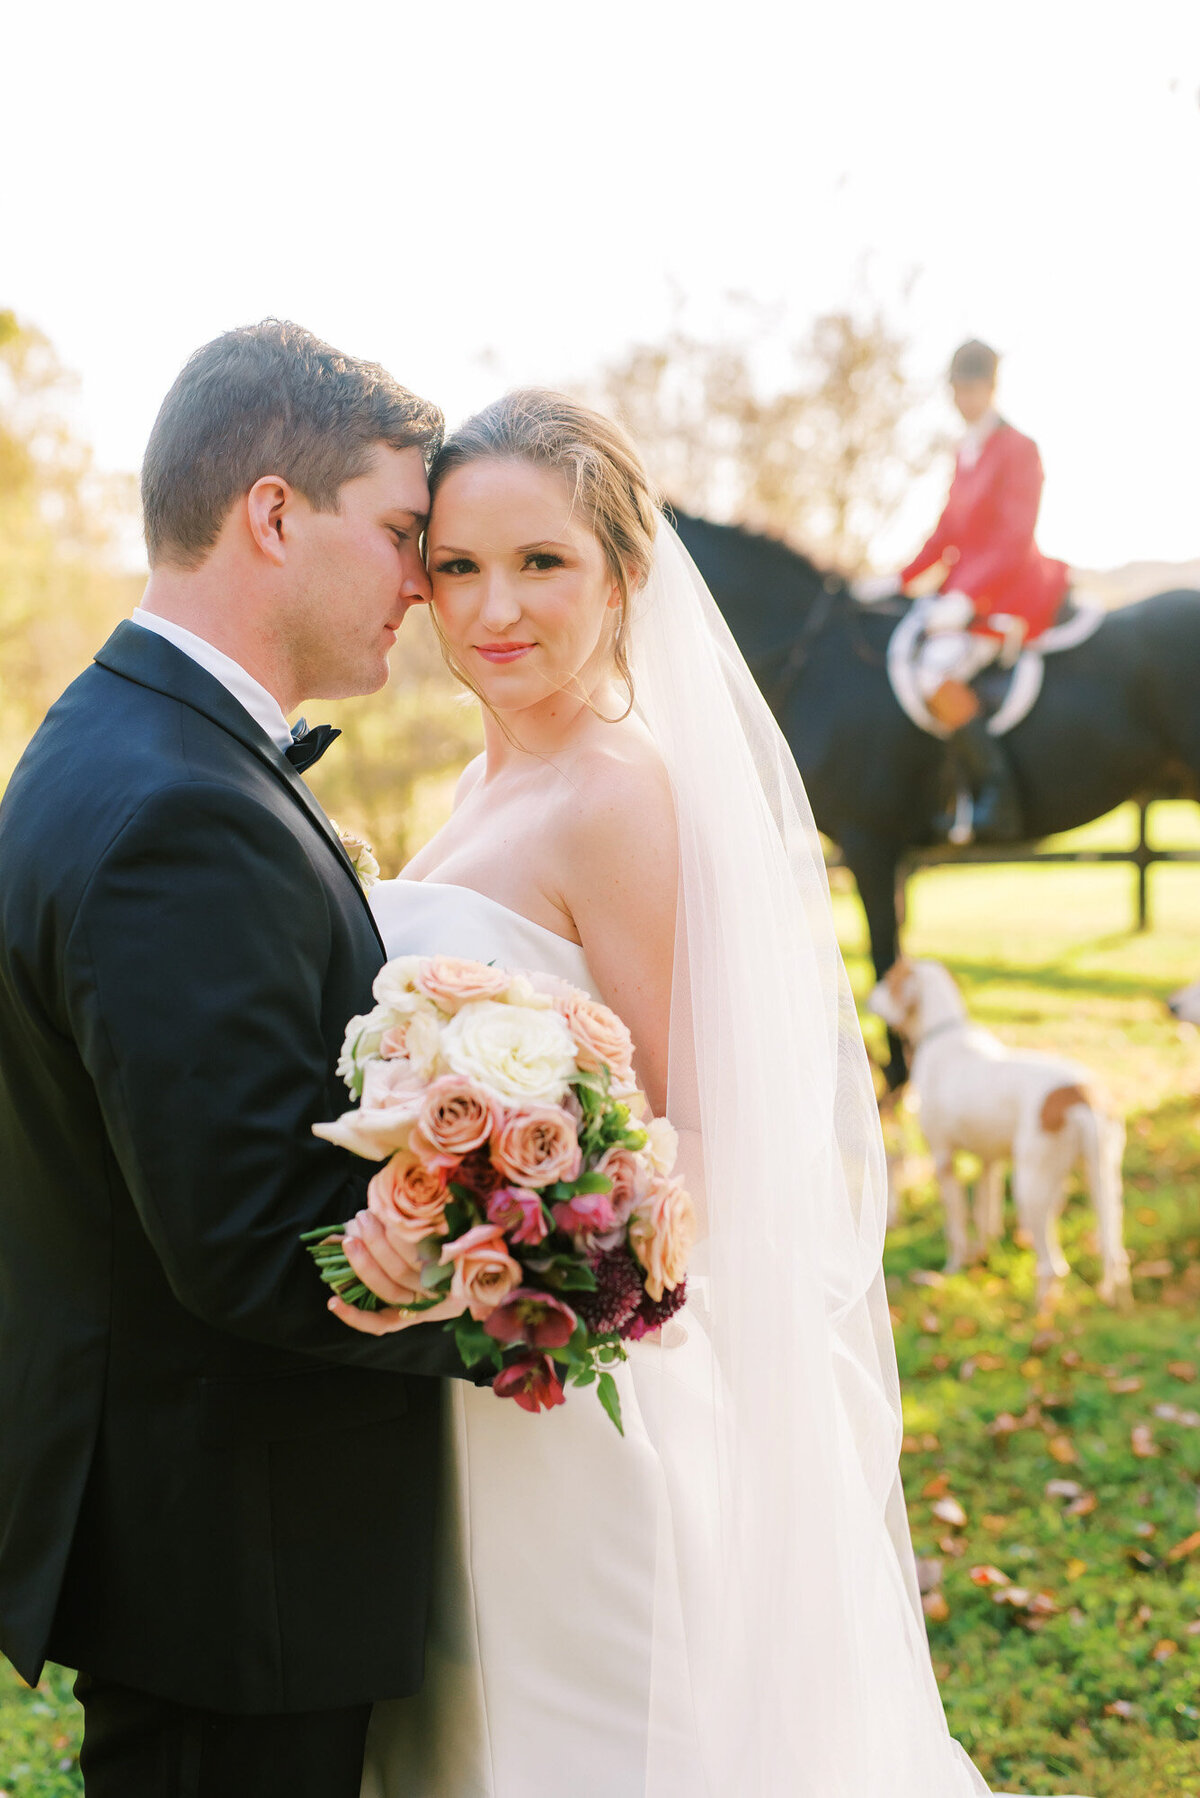 Sweet bride and groom while someone behind is riding a horse and a dog looking